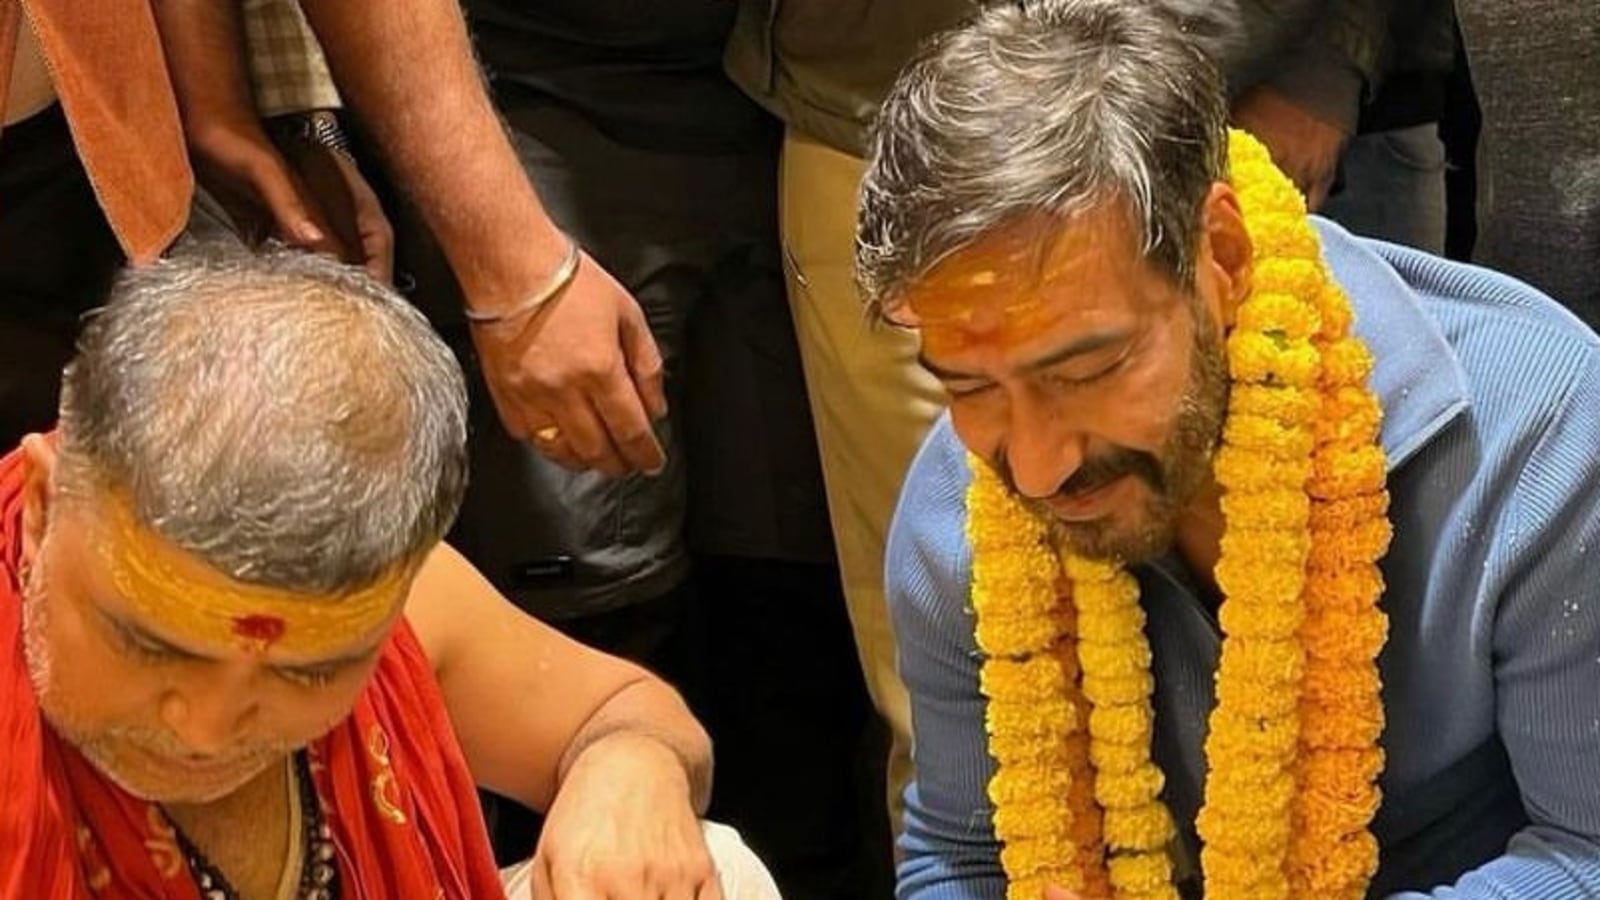 Ajay Devgn visits Kashi Vishwanath Temple in Varanasi, says ‘Been waiting for this for a very long time!’ See pic